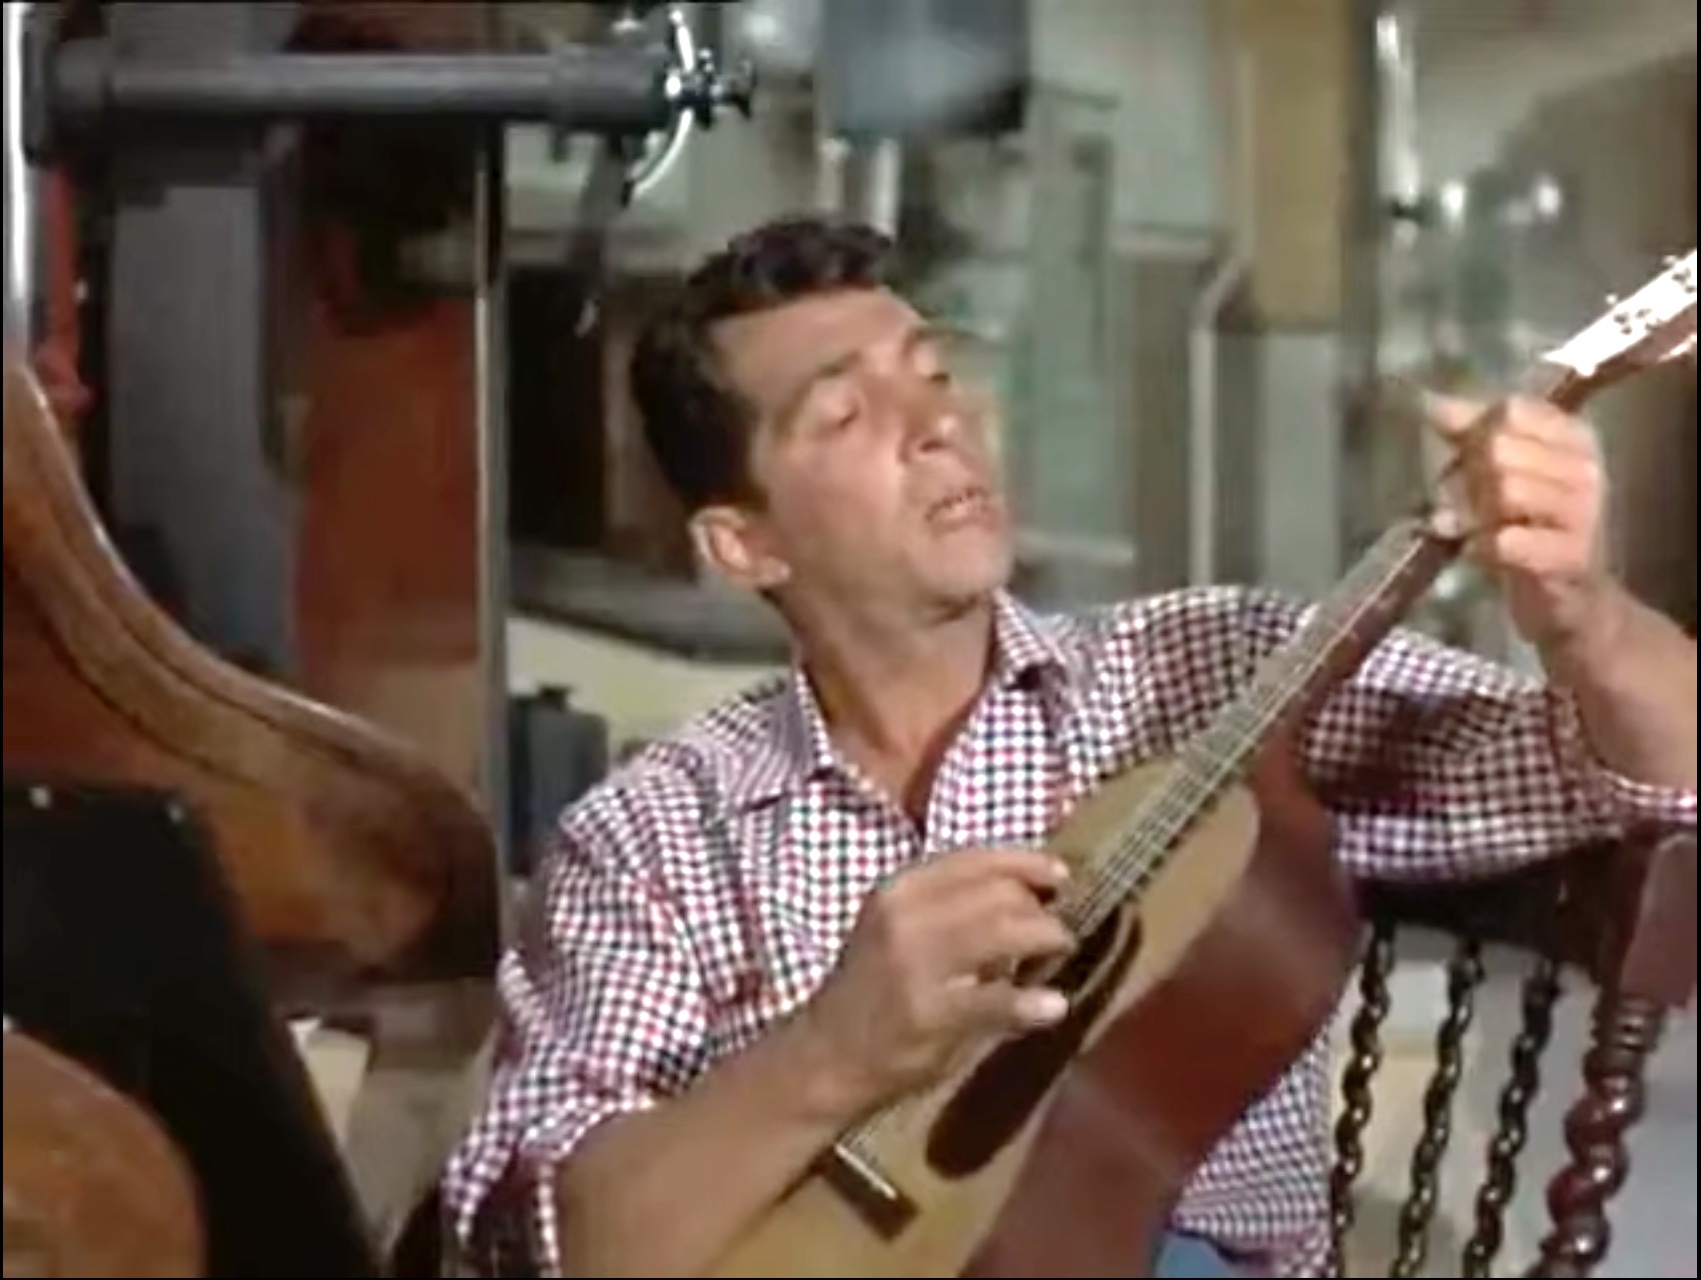 Song lyrics to That's What I Like. Music by Jule Styne, Lyrics by Bob Hilliard. Sung by Dean Martin in Living It Up.